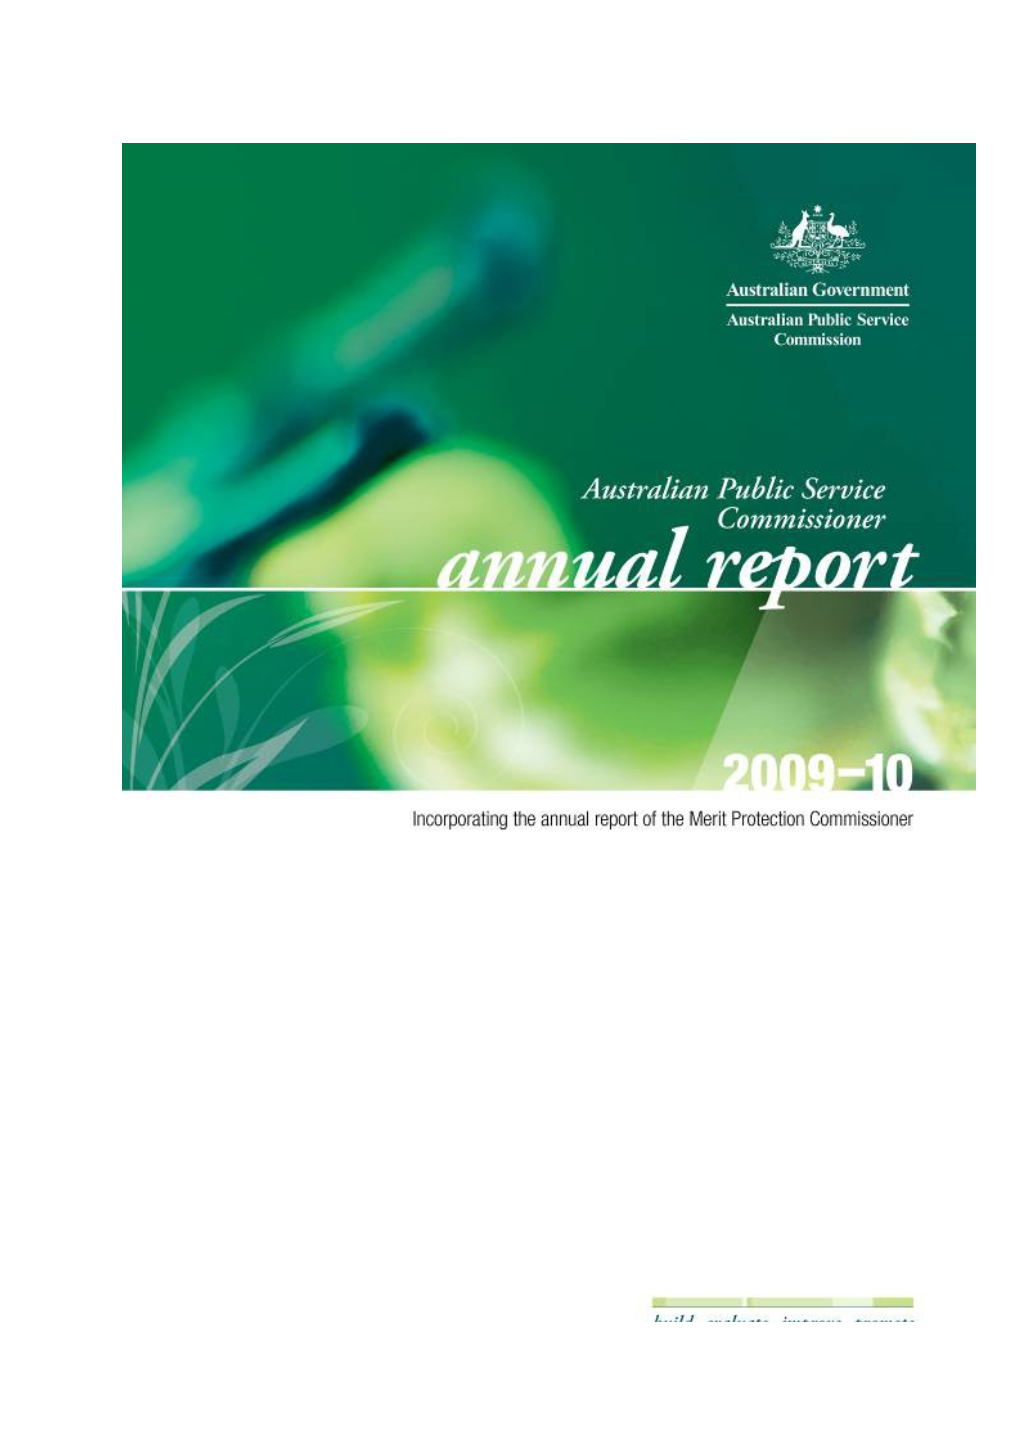 Welcome to Our Annual Report for 2009-10